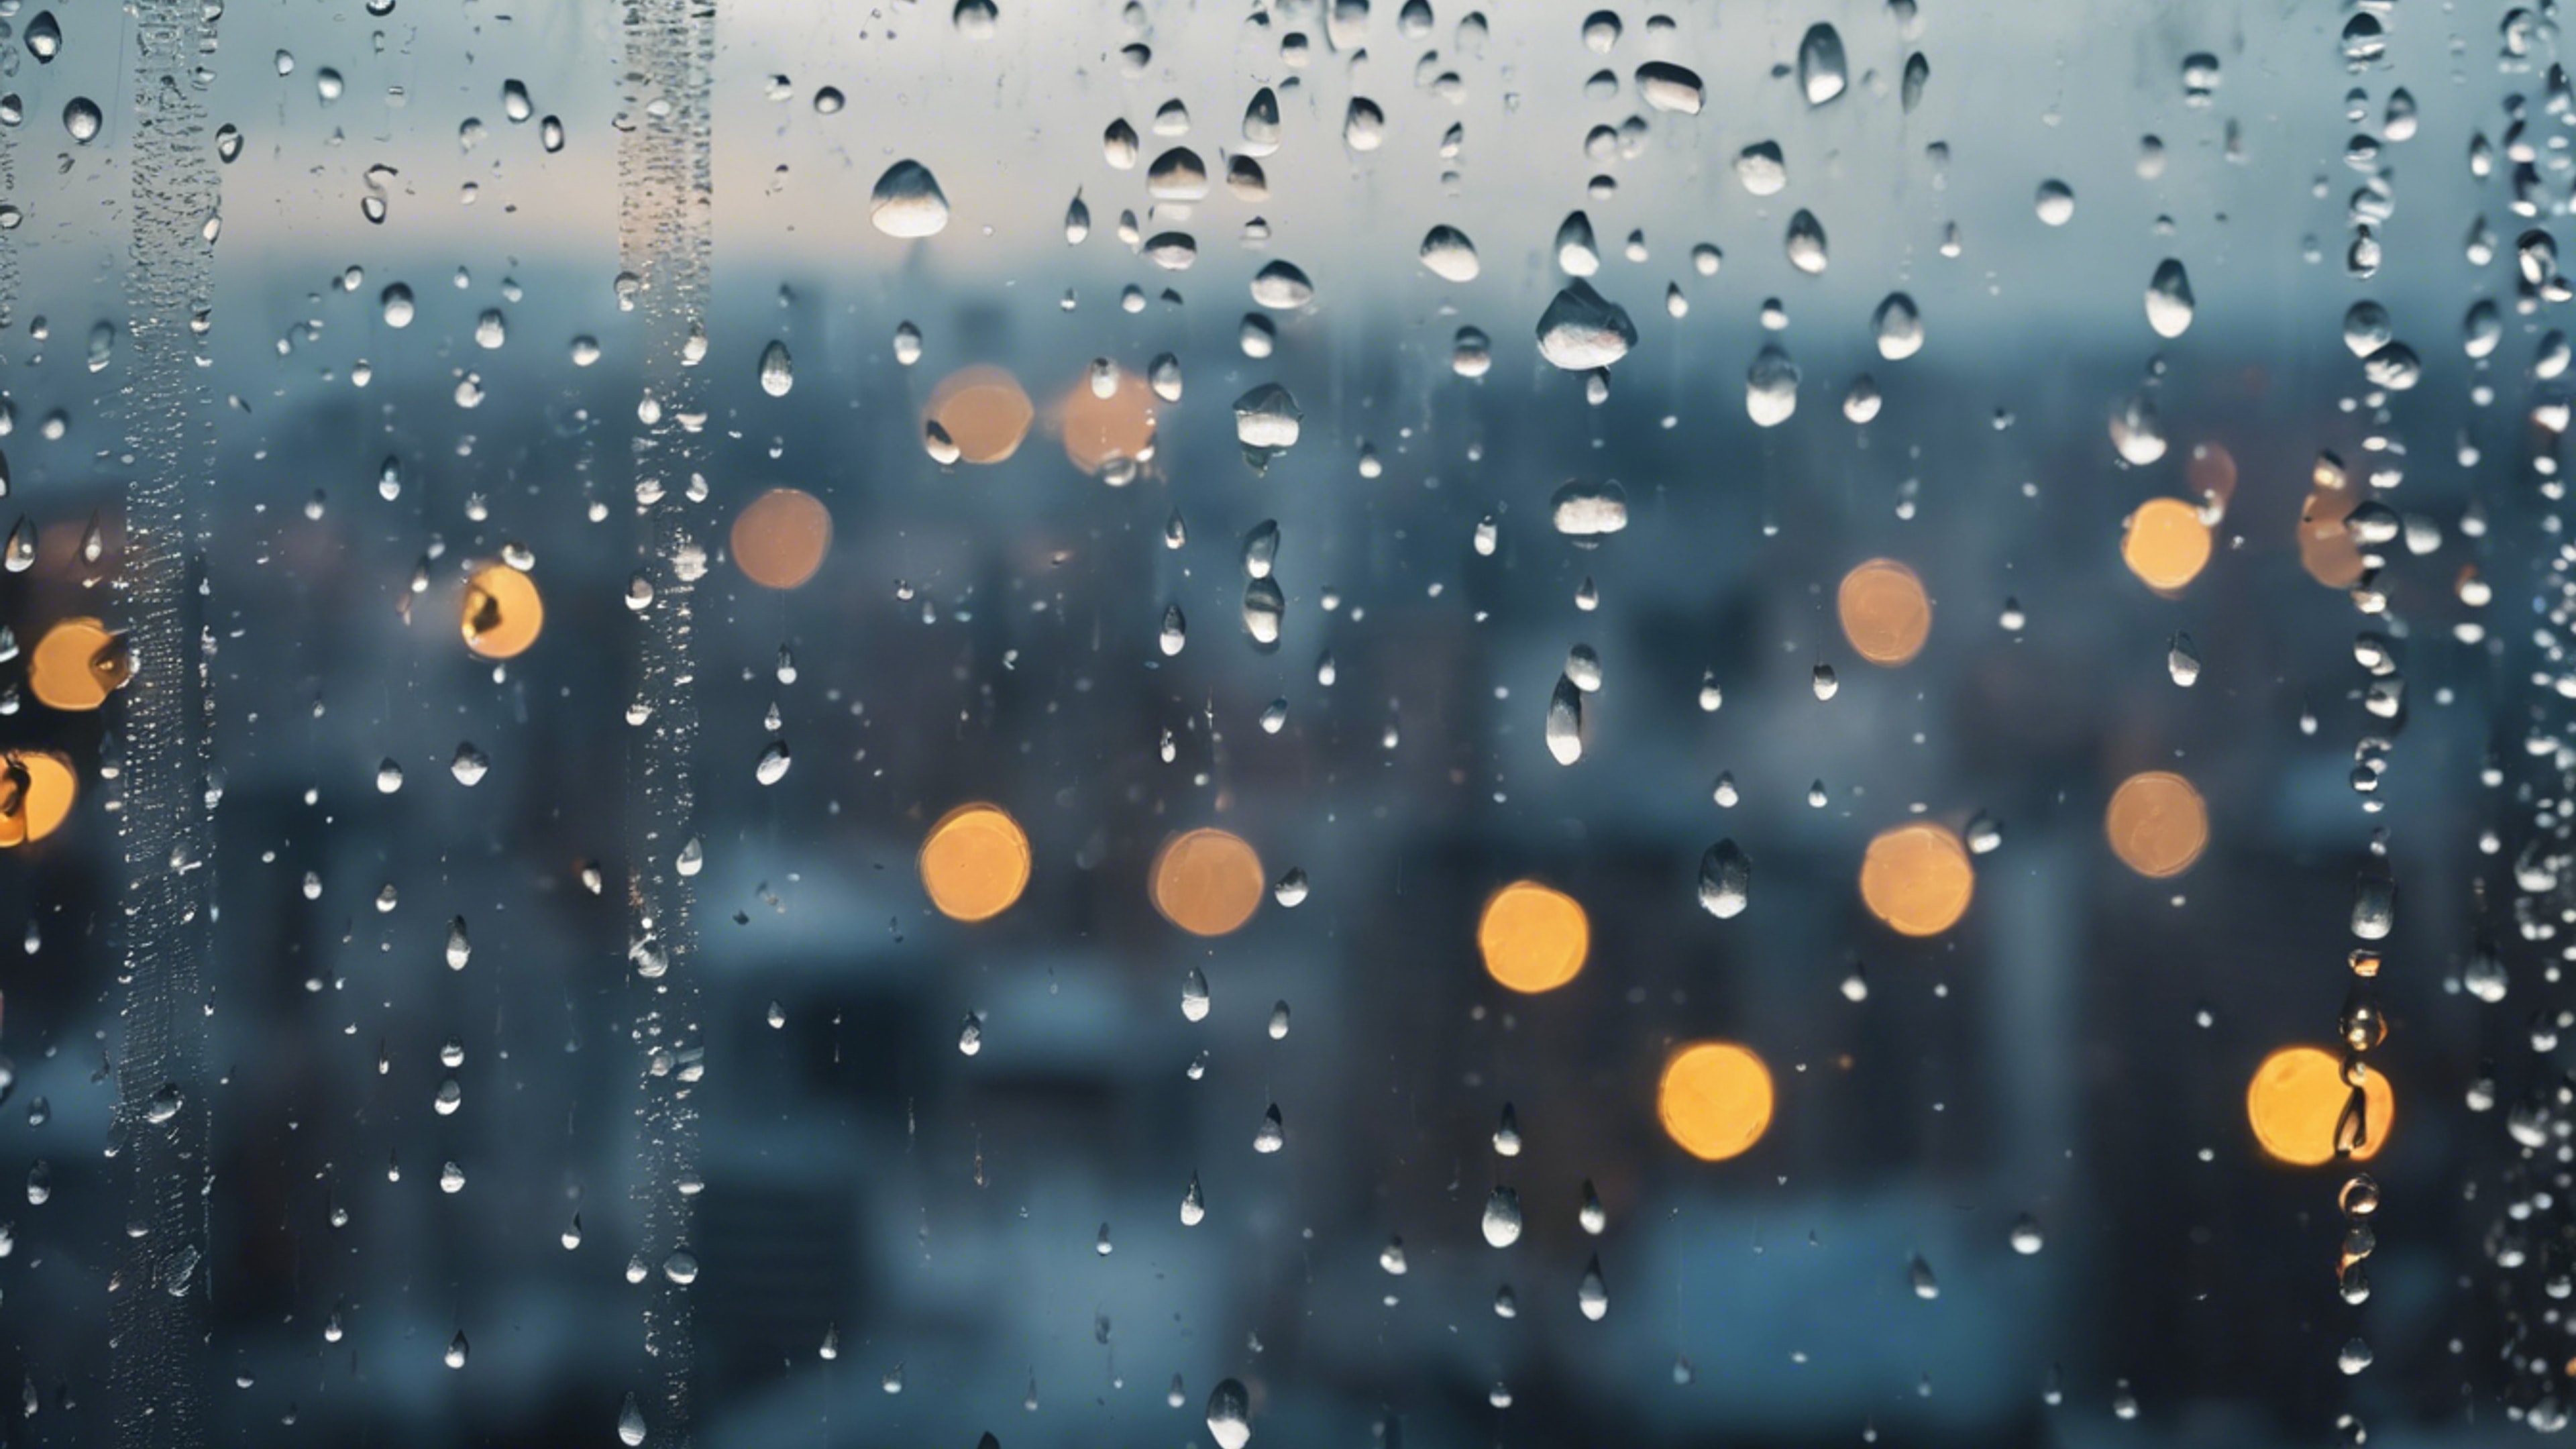 Close-up of raindrops streaming down a window pane, with a blurry cityscape in the background. Дэлгэцийн зураг[d0f87e7319714e23a96f]